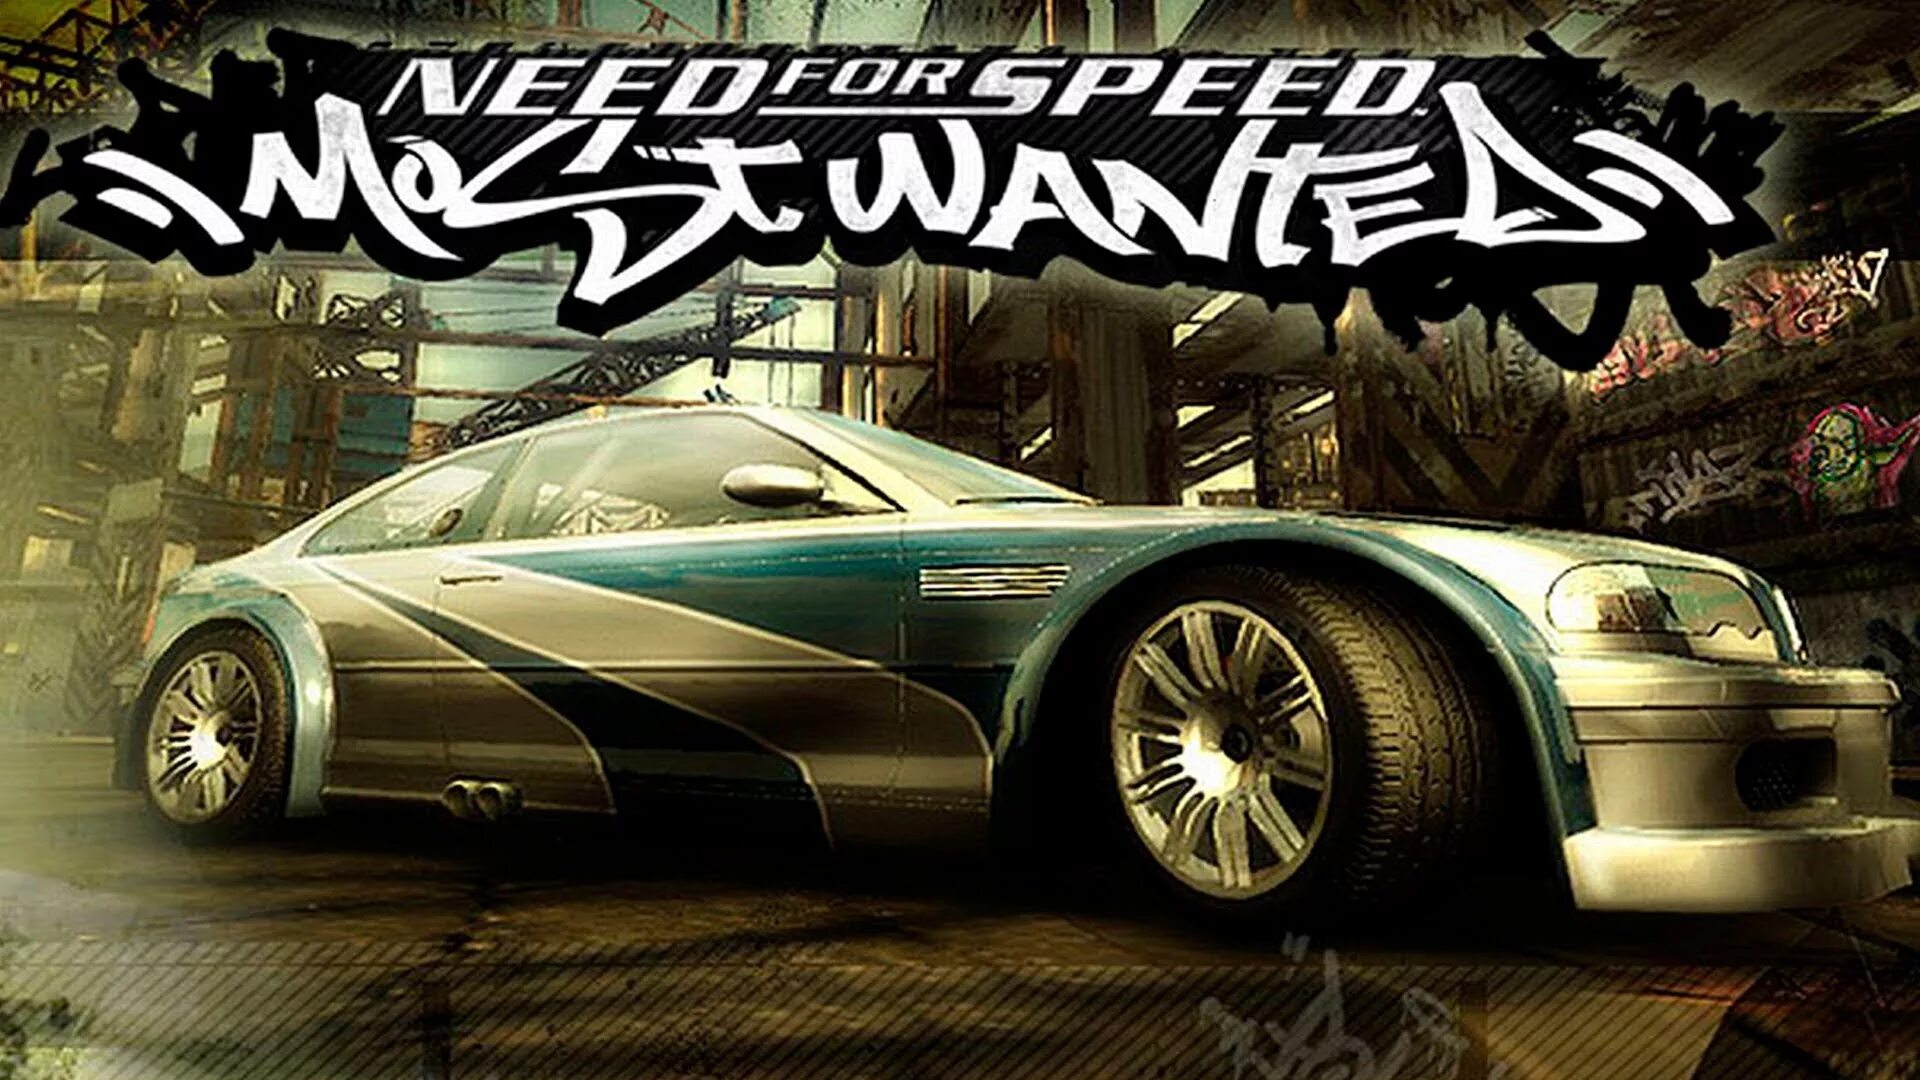 NFS most wanted 2005 русская версия. Постер нфс мост вантед 2005. NFS most wanted 2005 Постер. Нидфорспид воствонтед. Музыка из мост вантед 2005